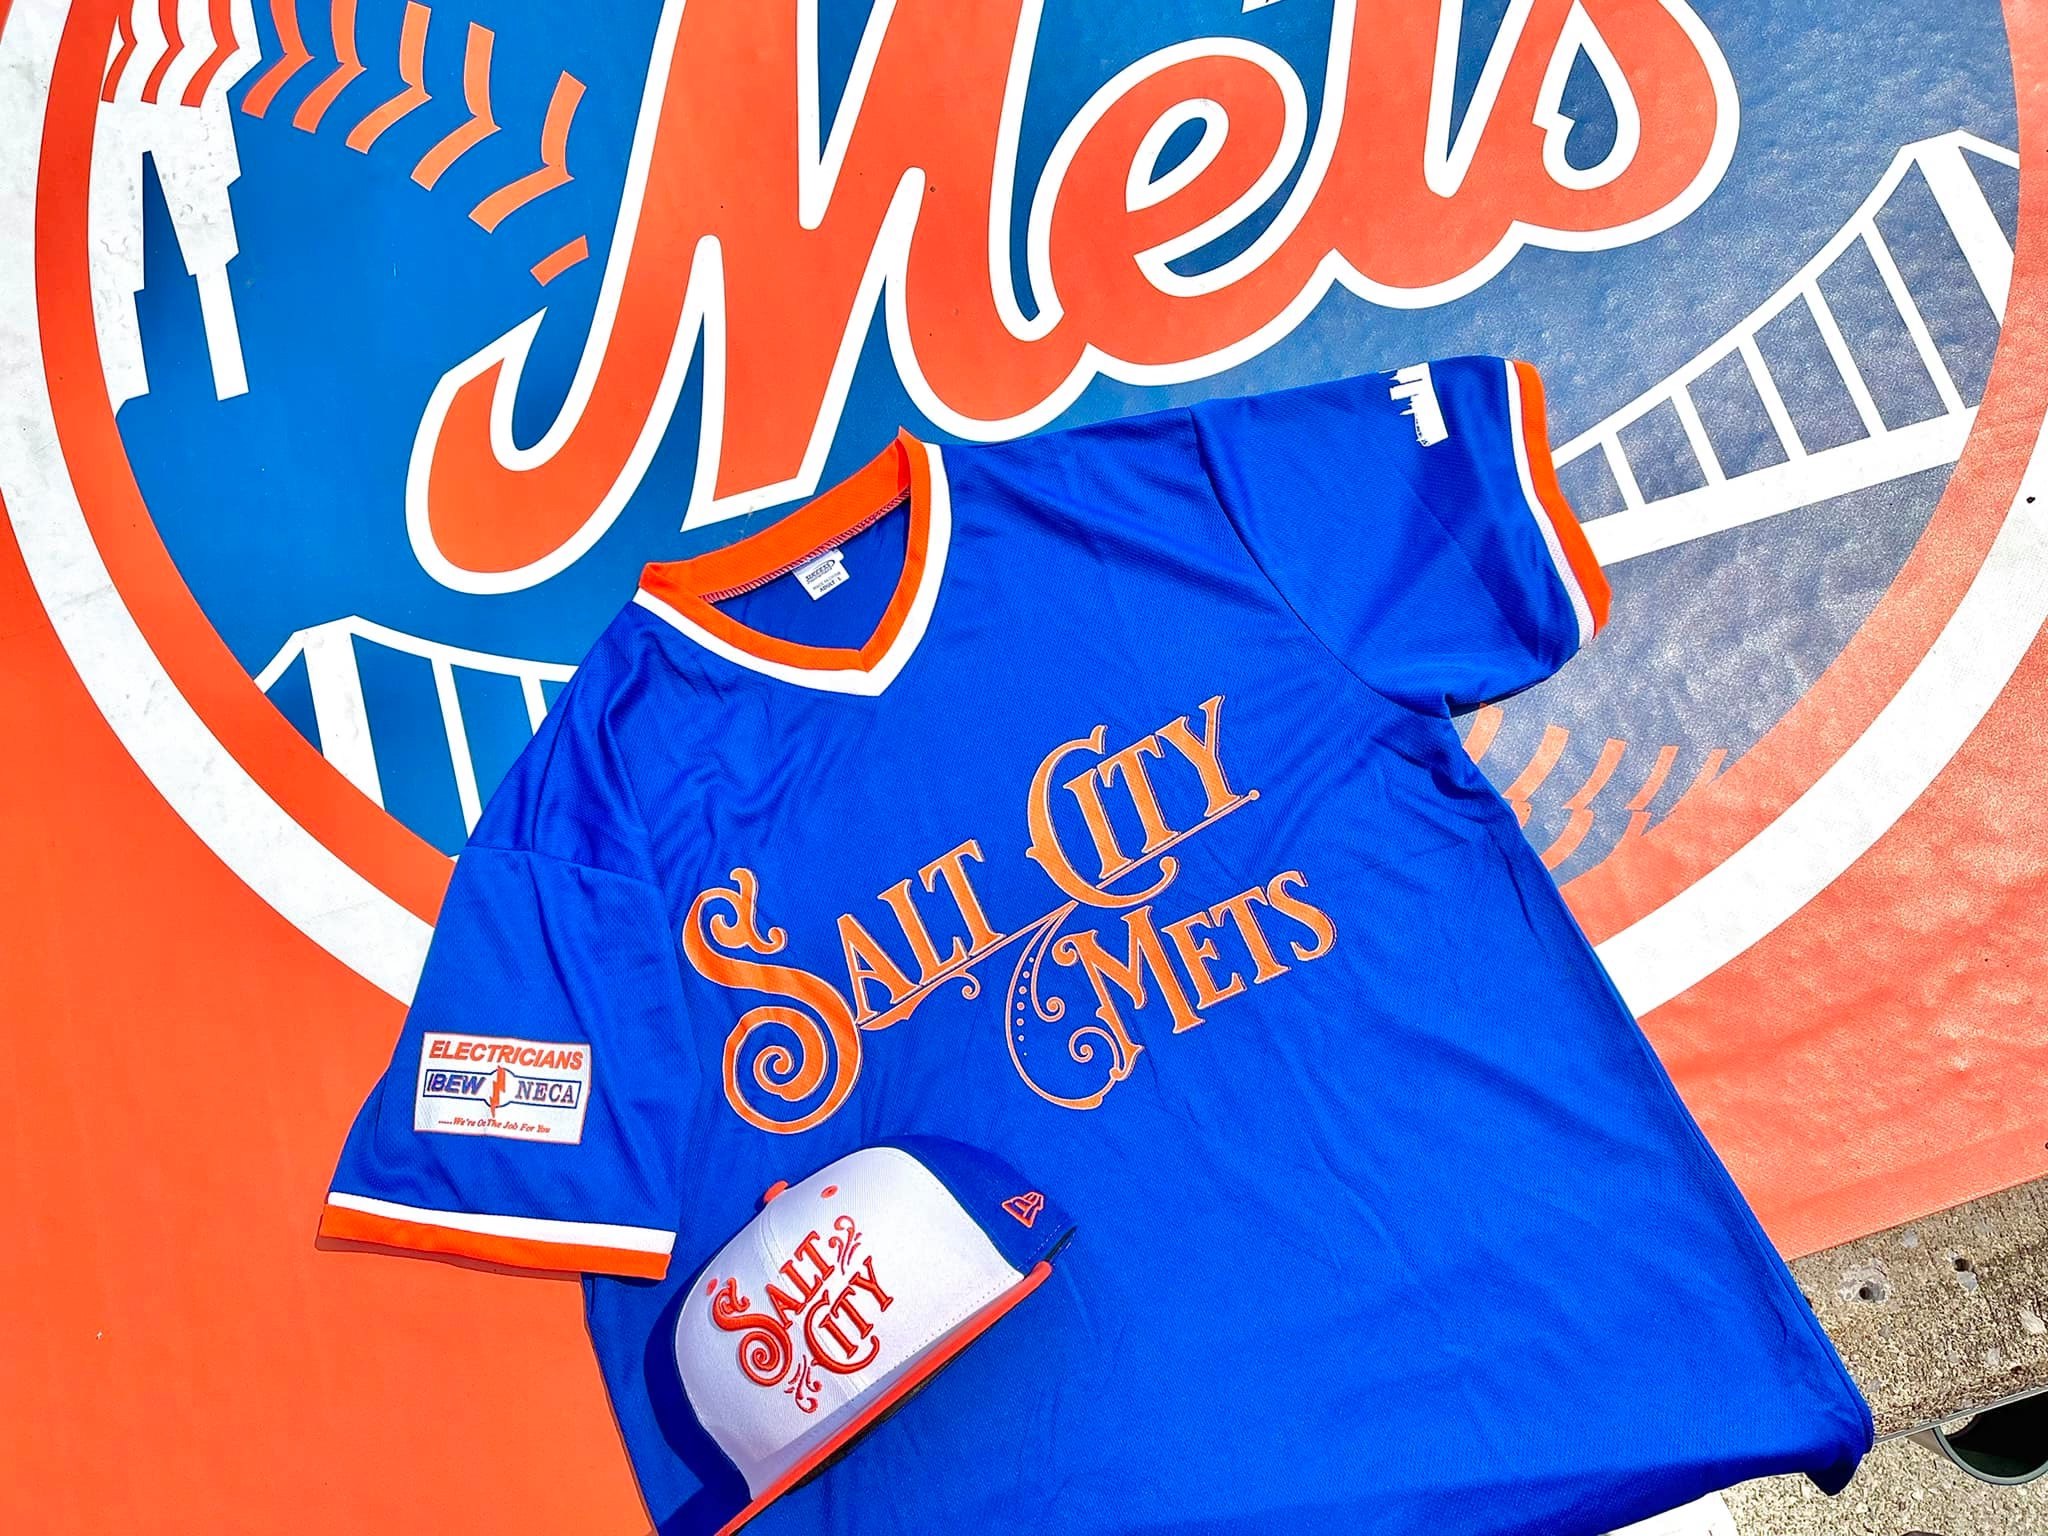 Syracuse Mets - Black Friday is coming on 11/25!!! Our